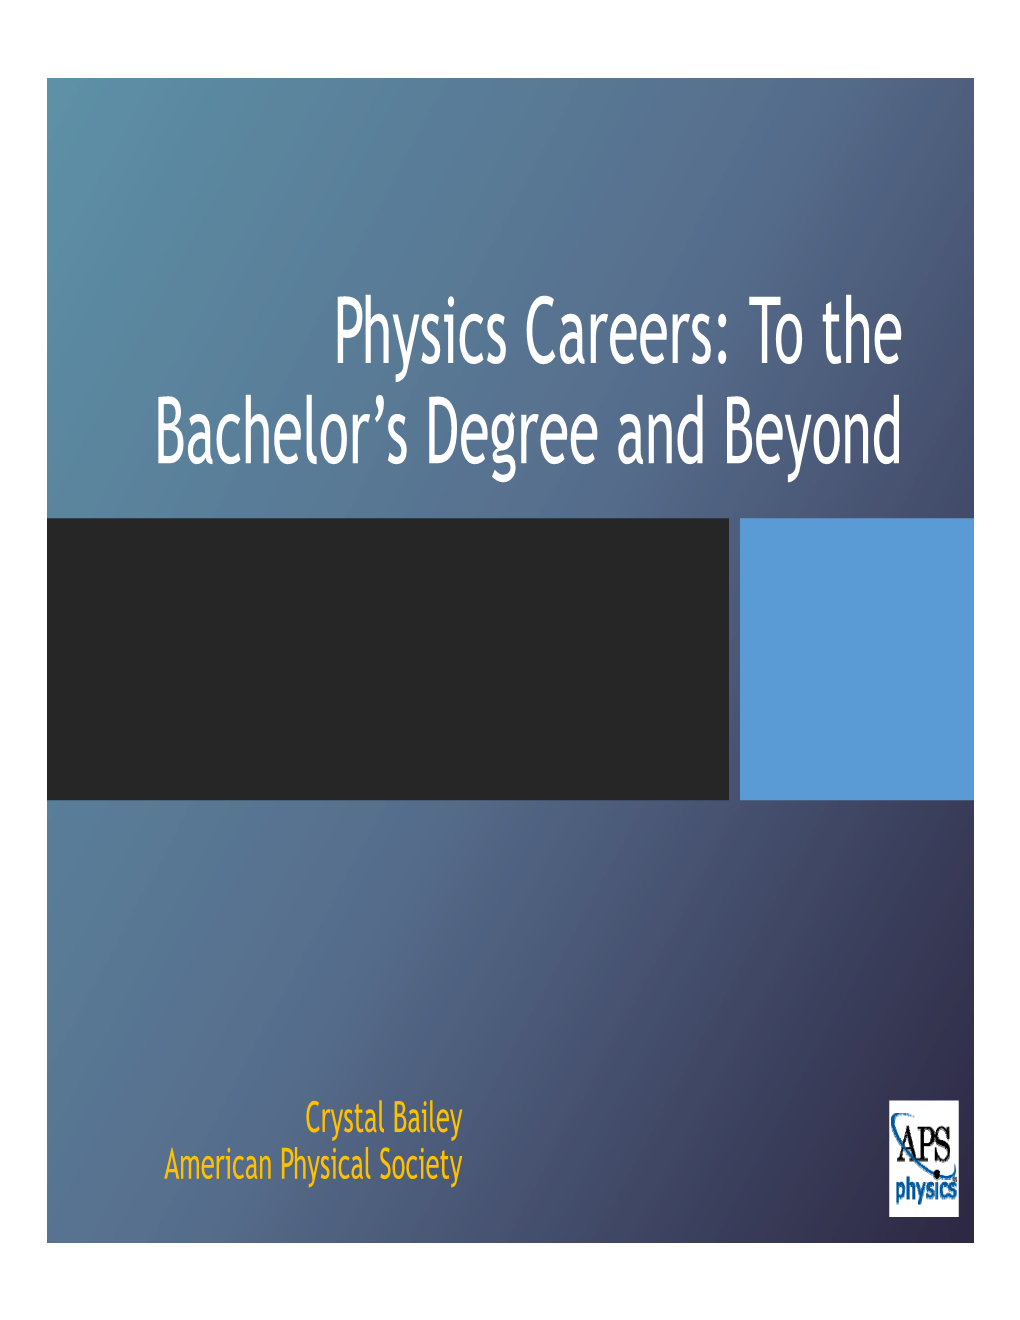 Physics Careers: to the Bachelor's Degree and Beyond